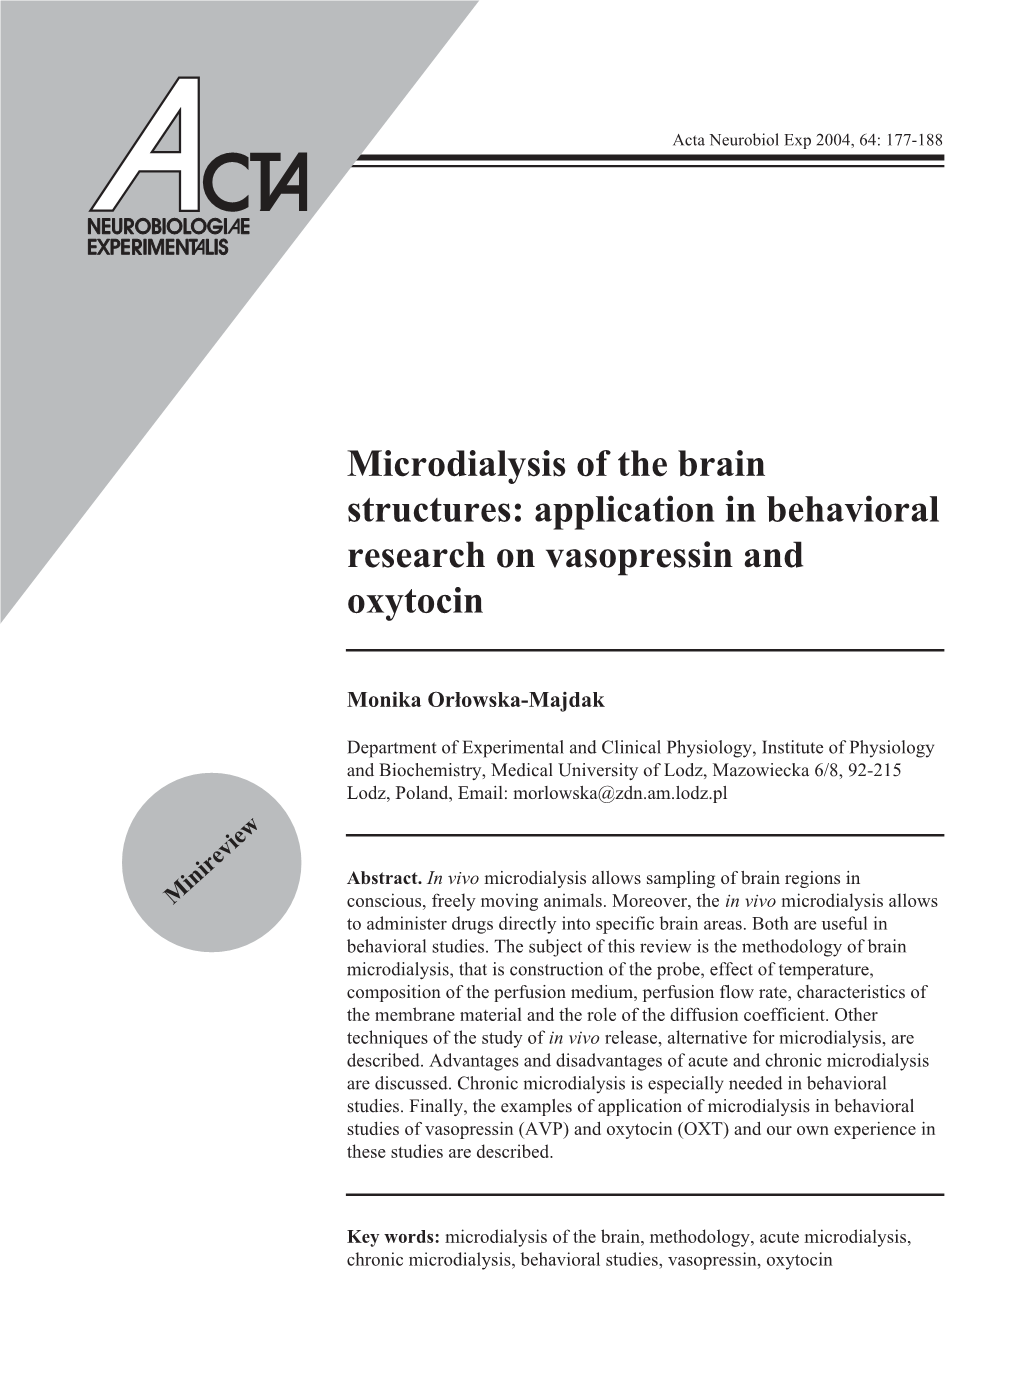 Microdialysis of the Brain Structures: Application in Behavioral Research on Vasopressin and Oxytocin